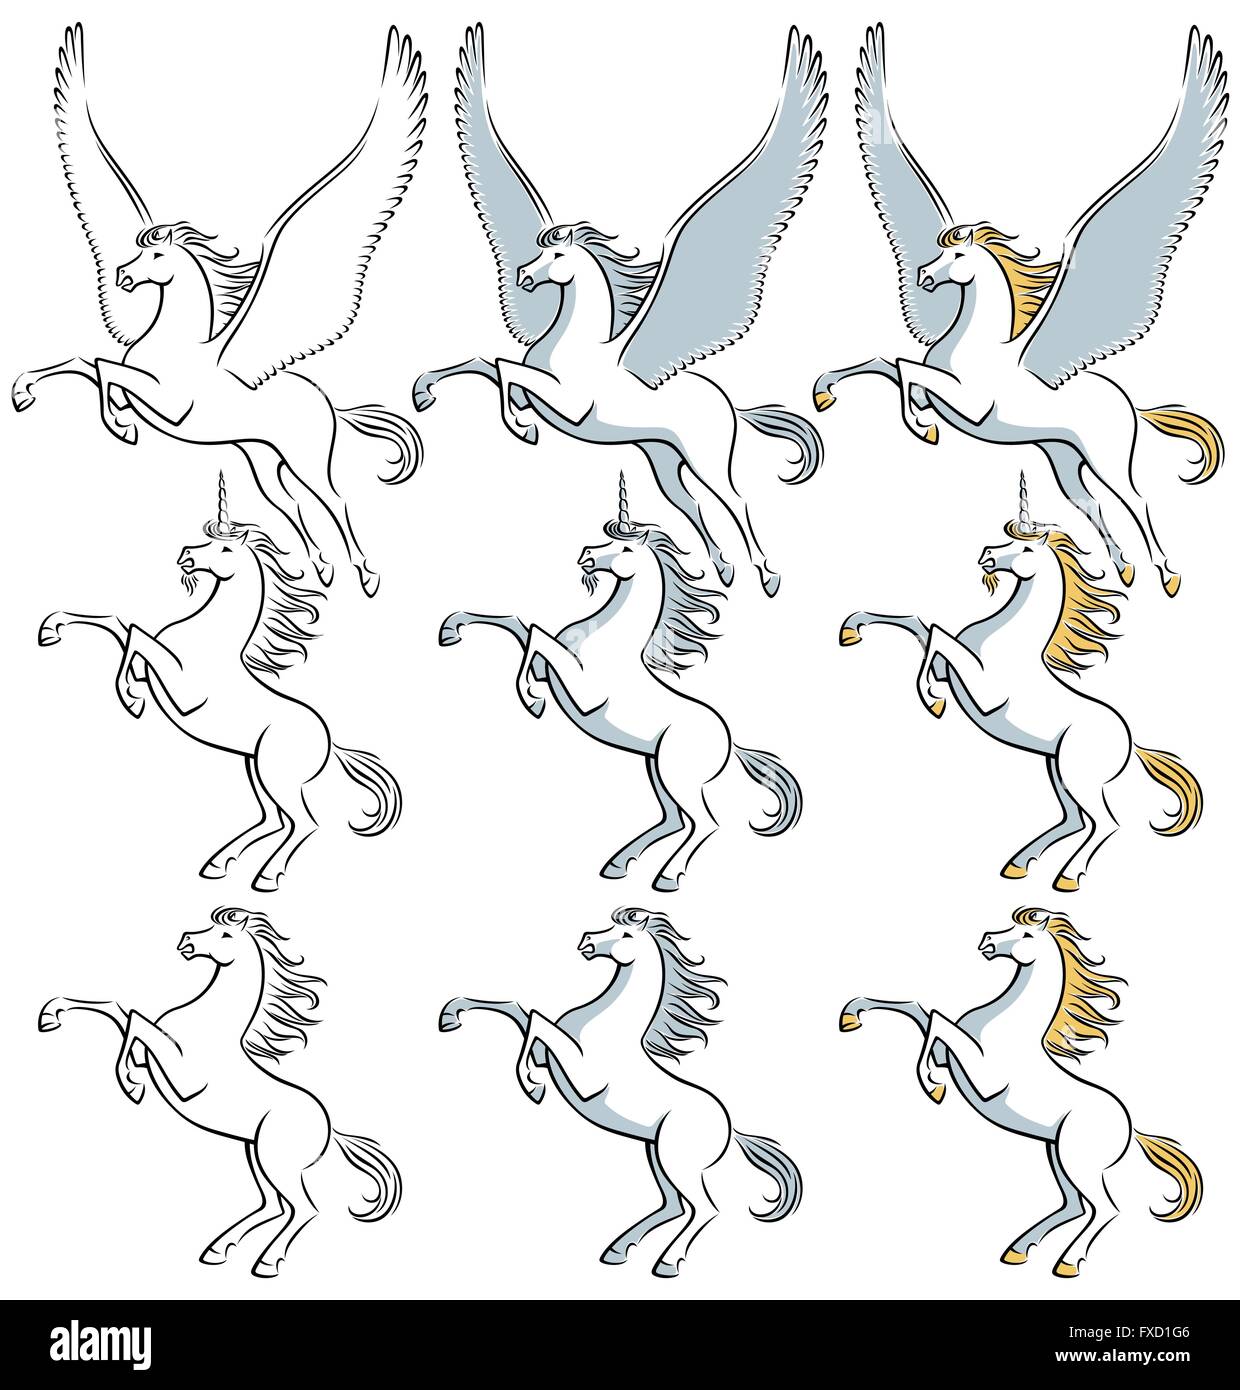 Pegasus, unicorn and stallion clip art. No transparency and gradients used. Stock Vector